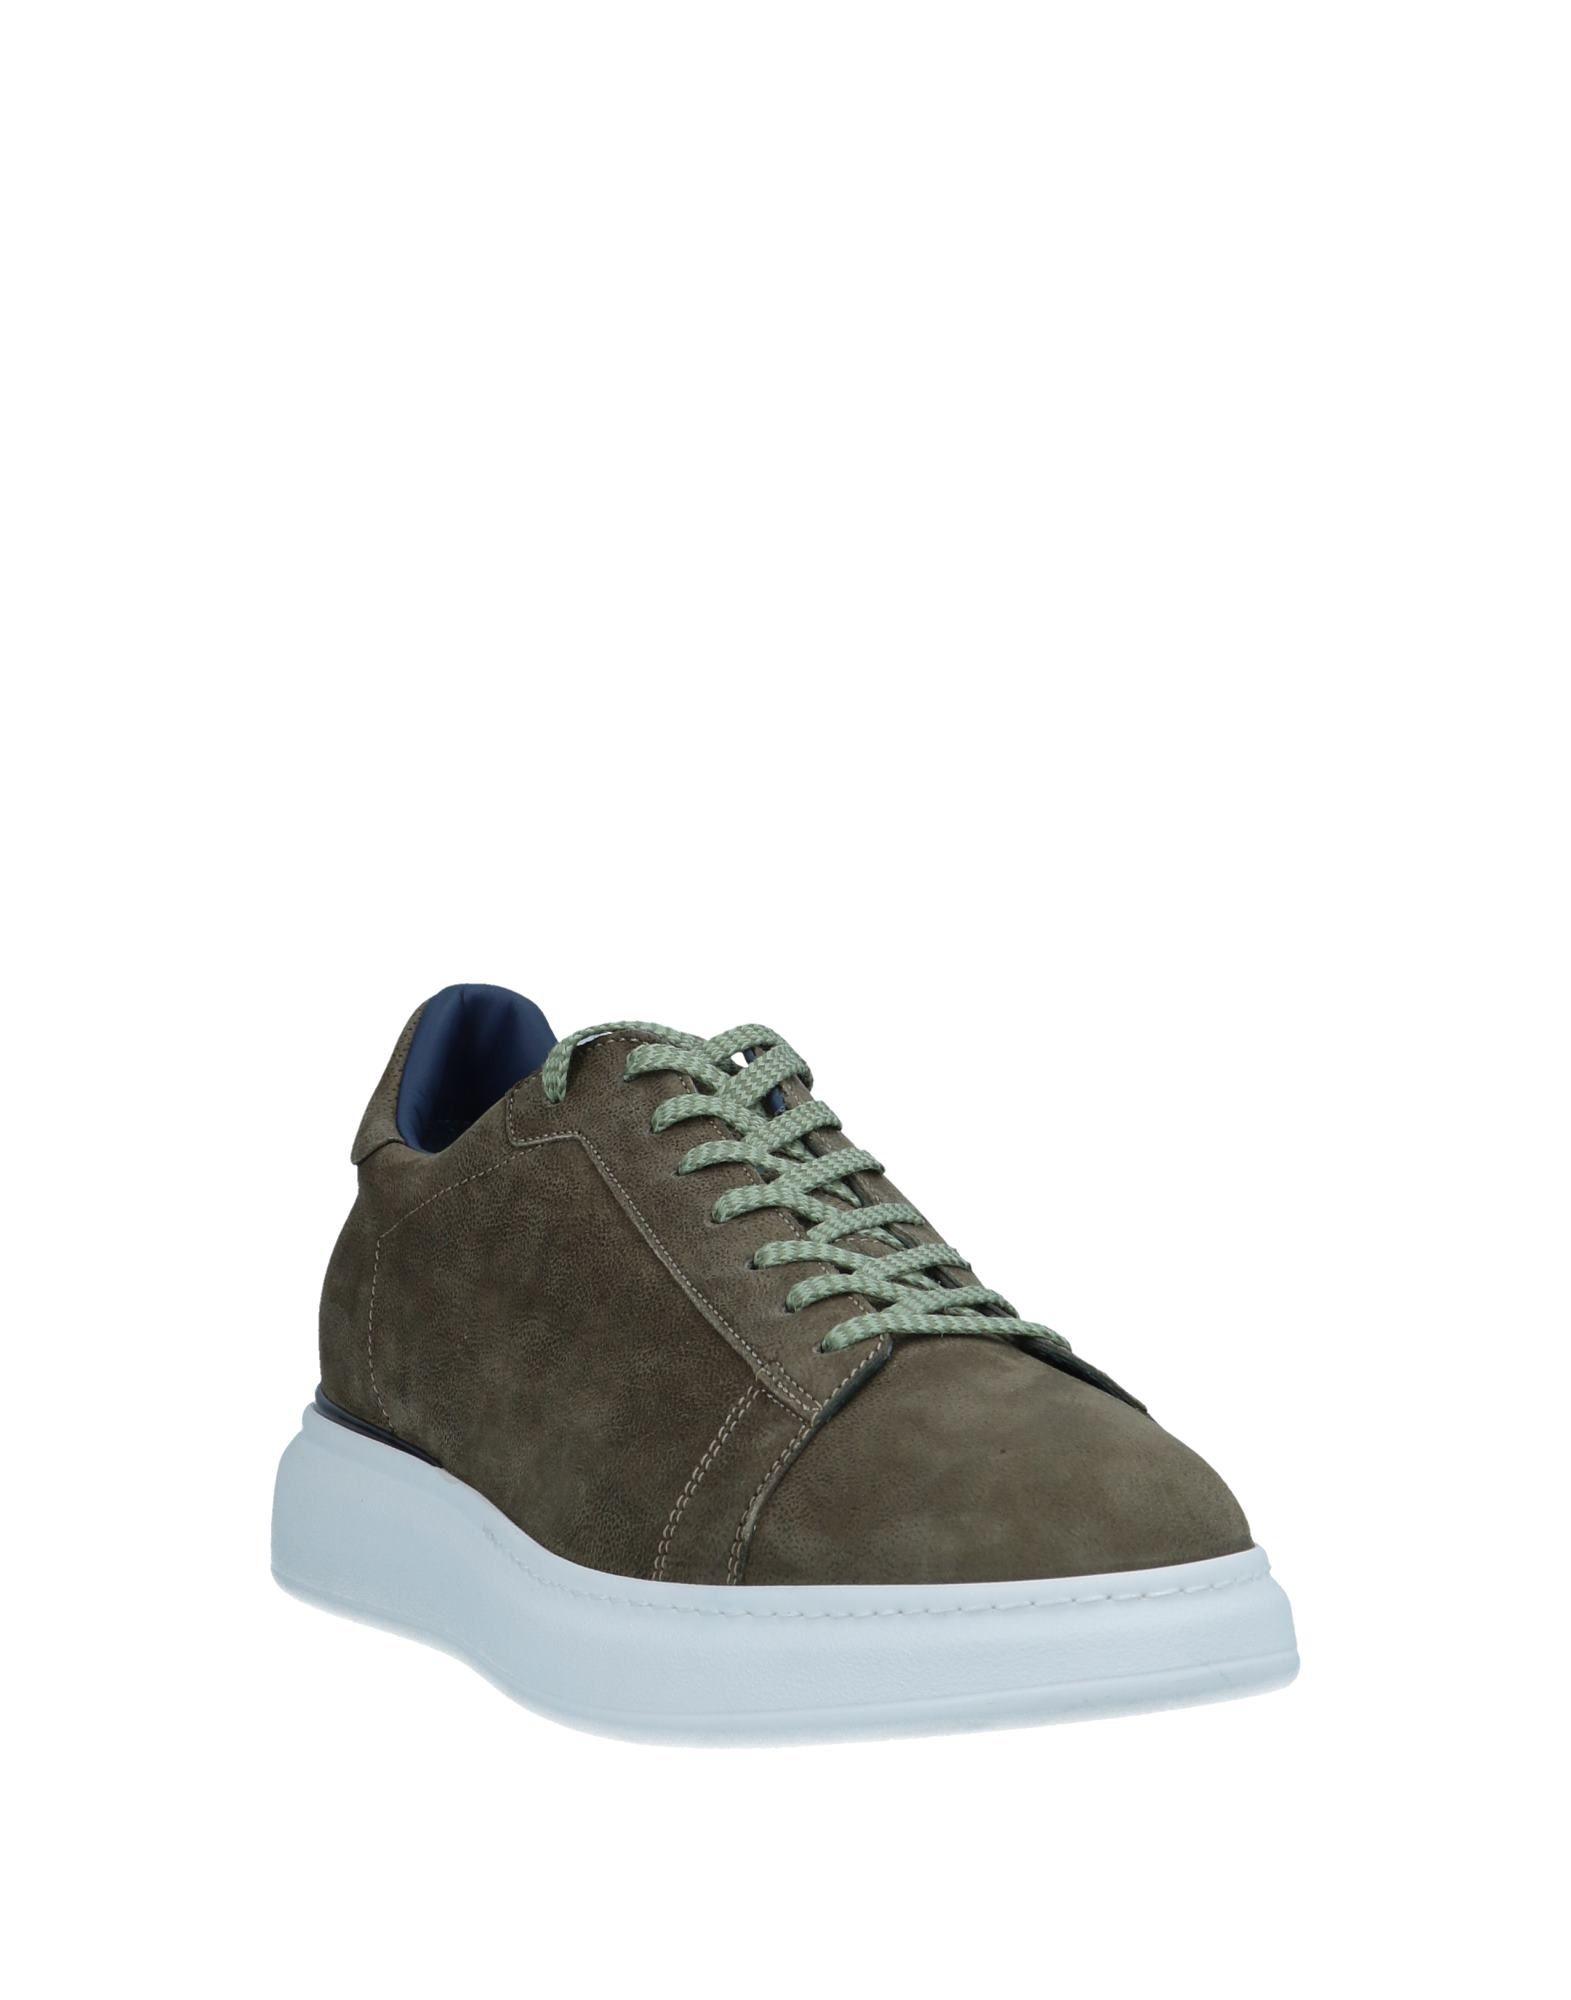 Alberto Guardiani Rubber Low-tops & Sneakers in Military Green (Green ...